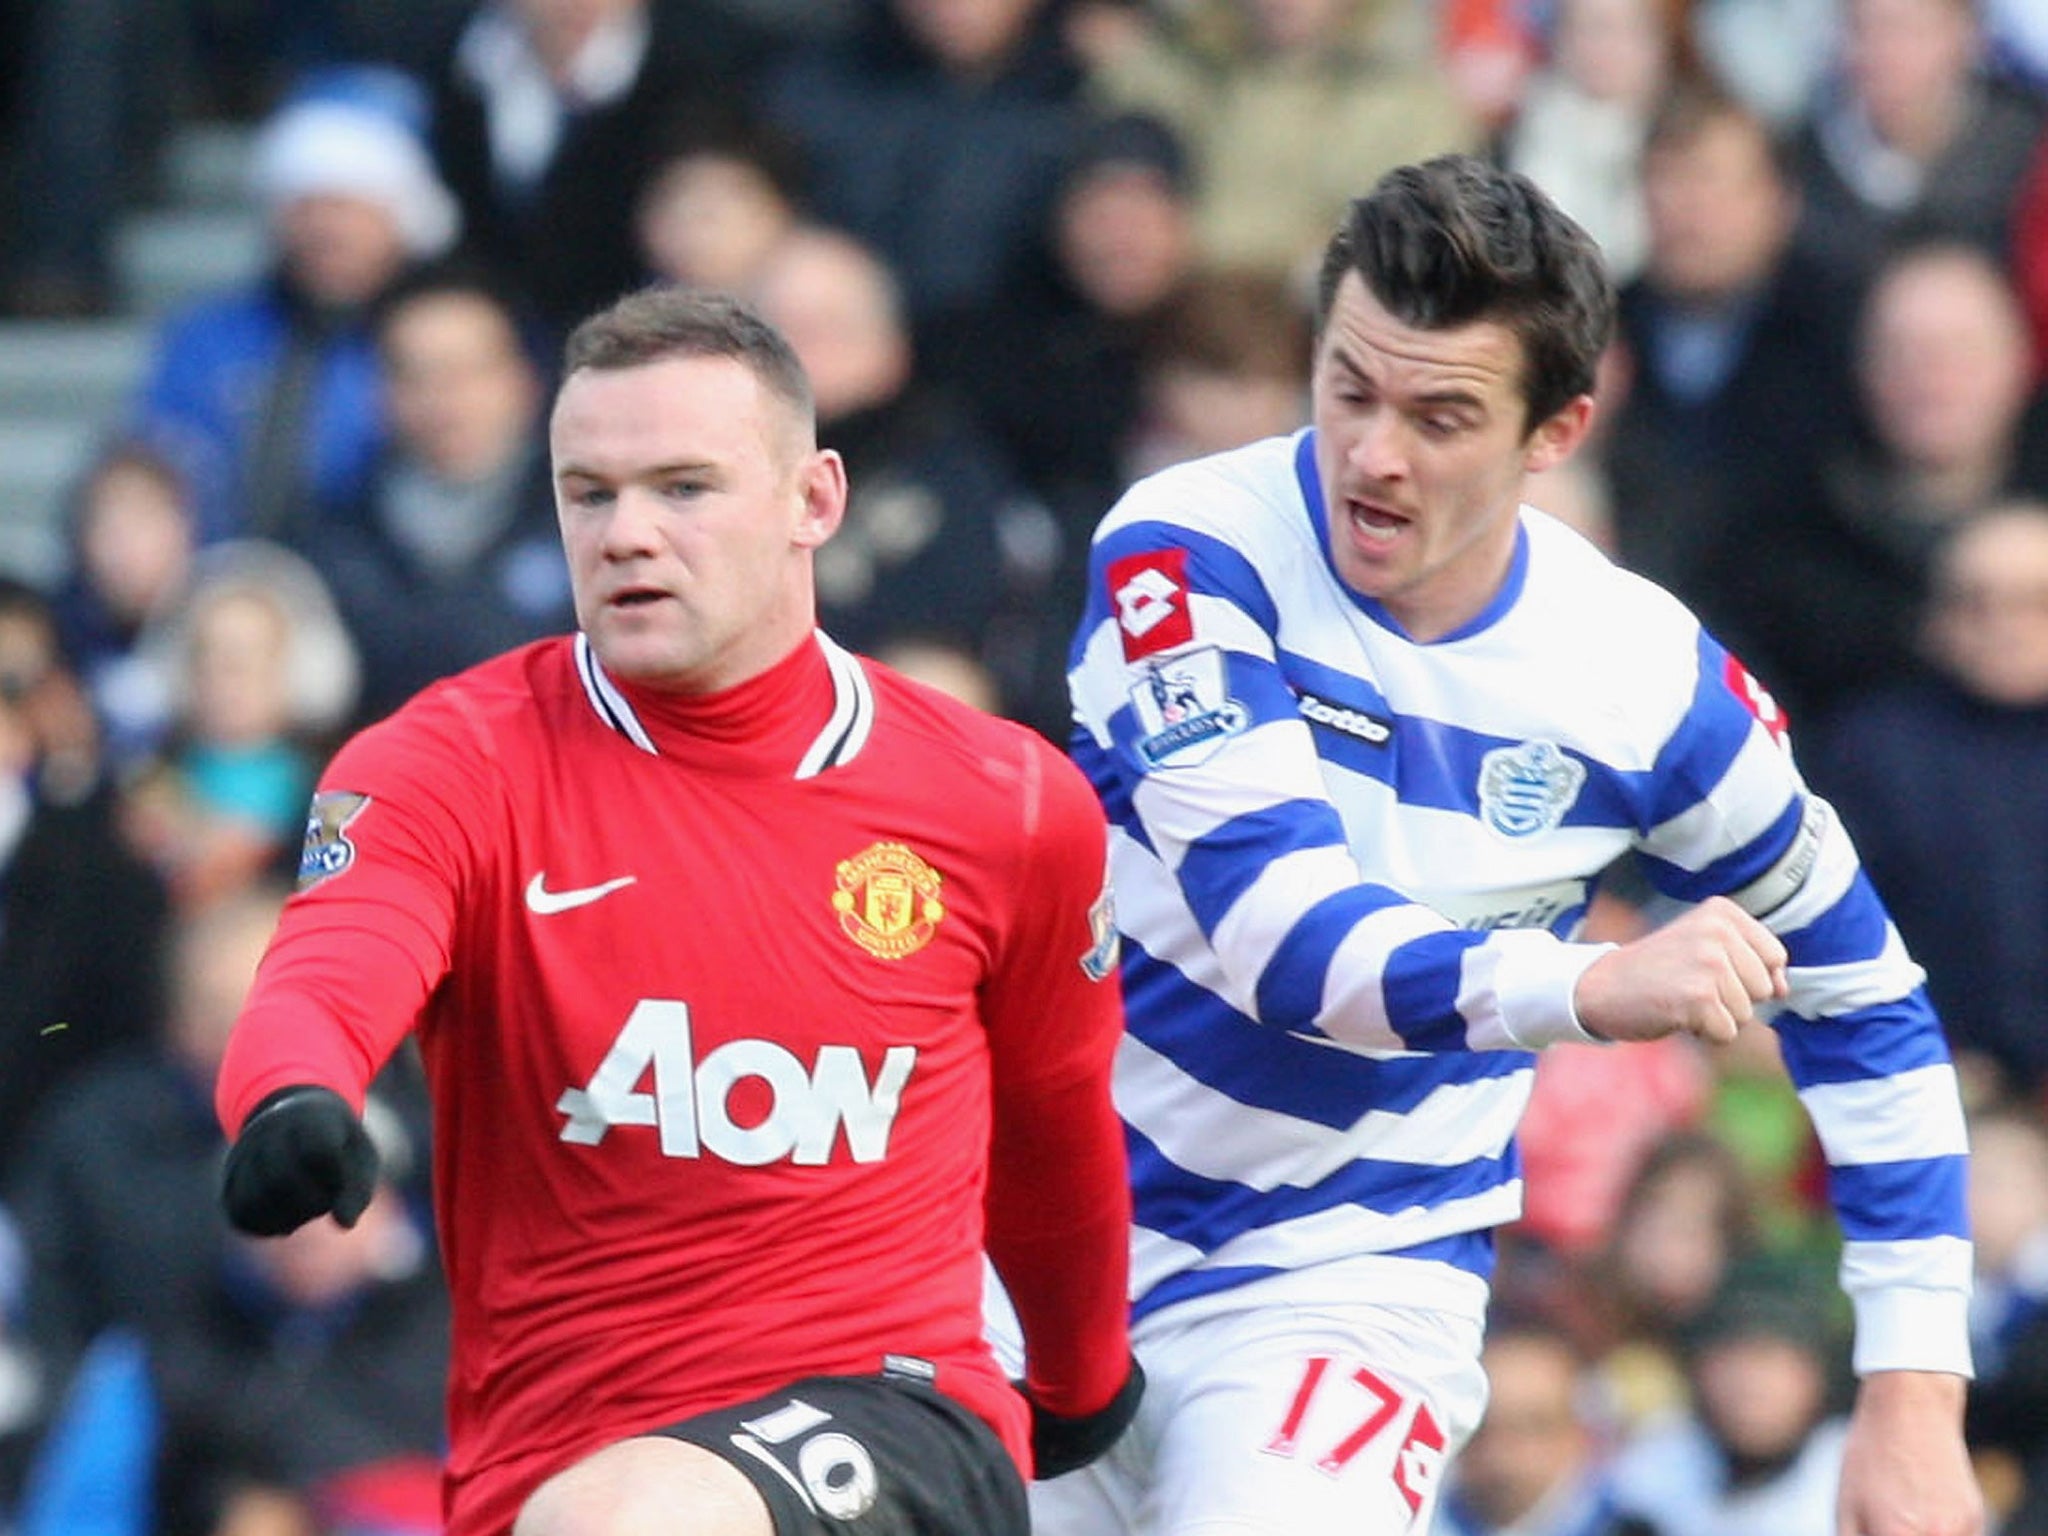 Barton in action against United while playing for Queens Park Rangers